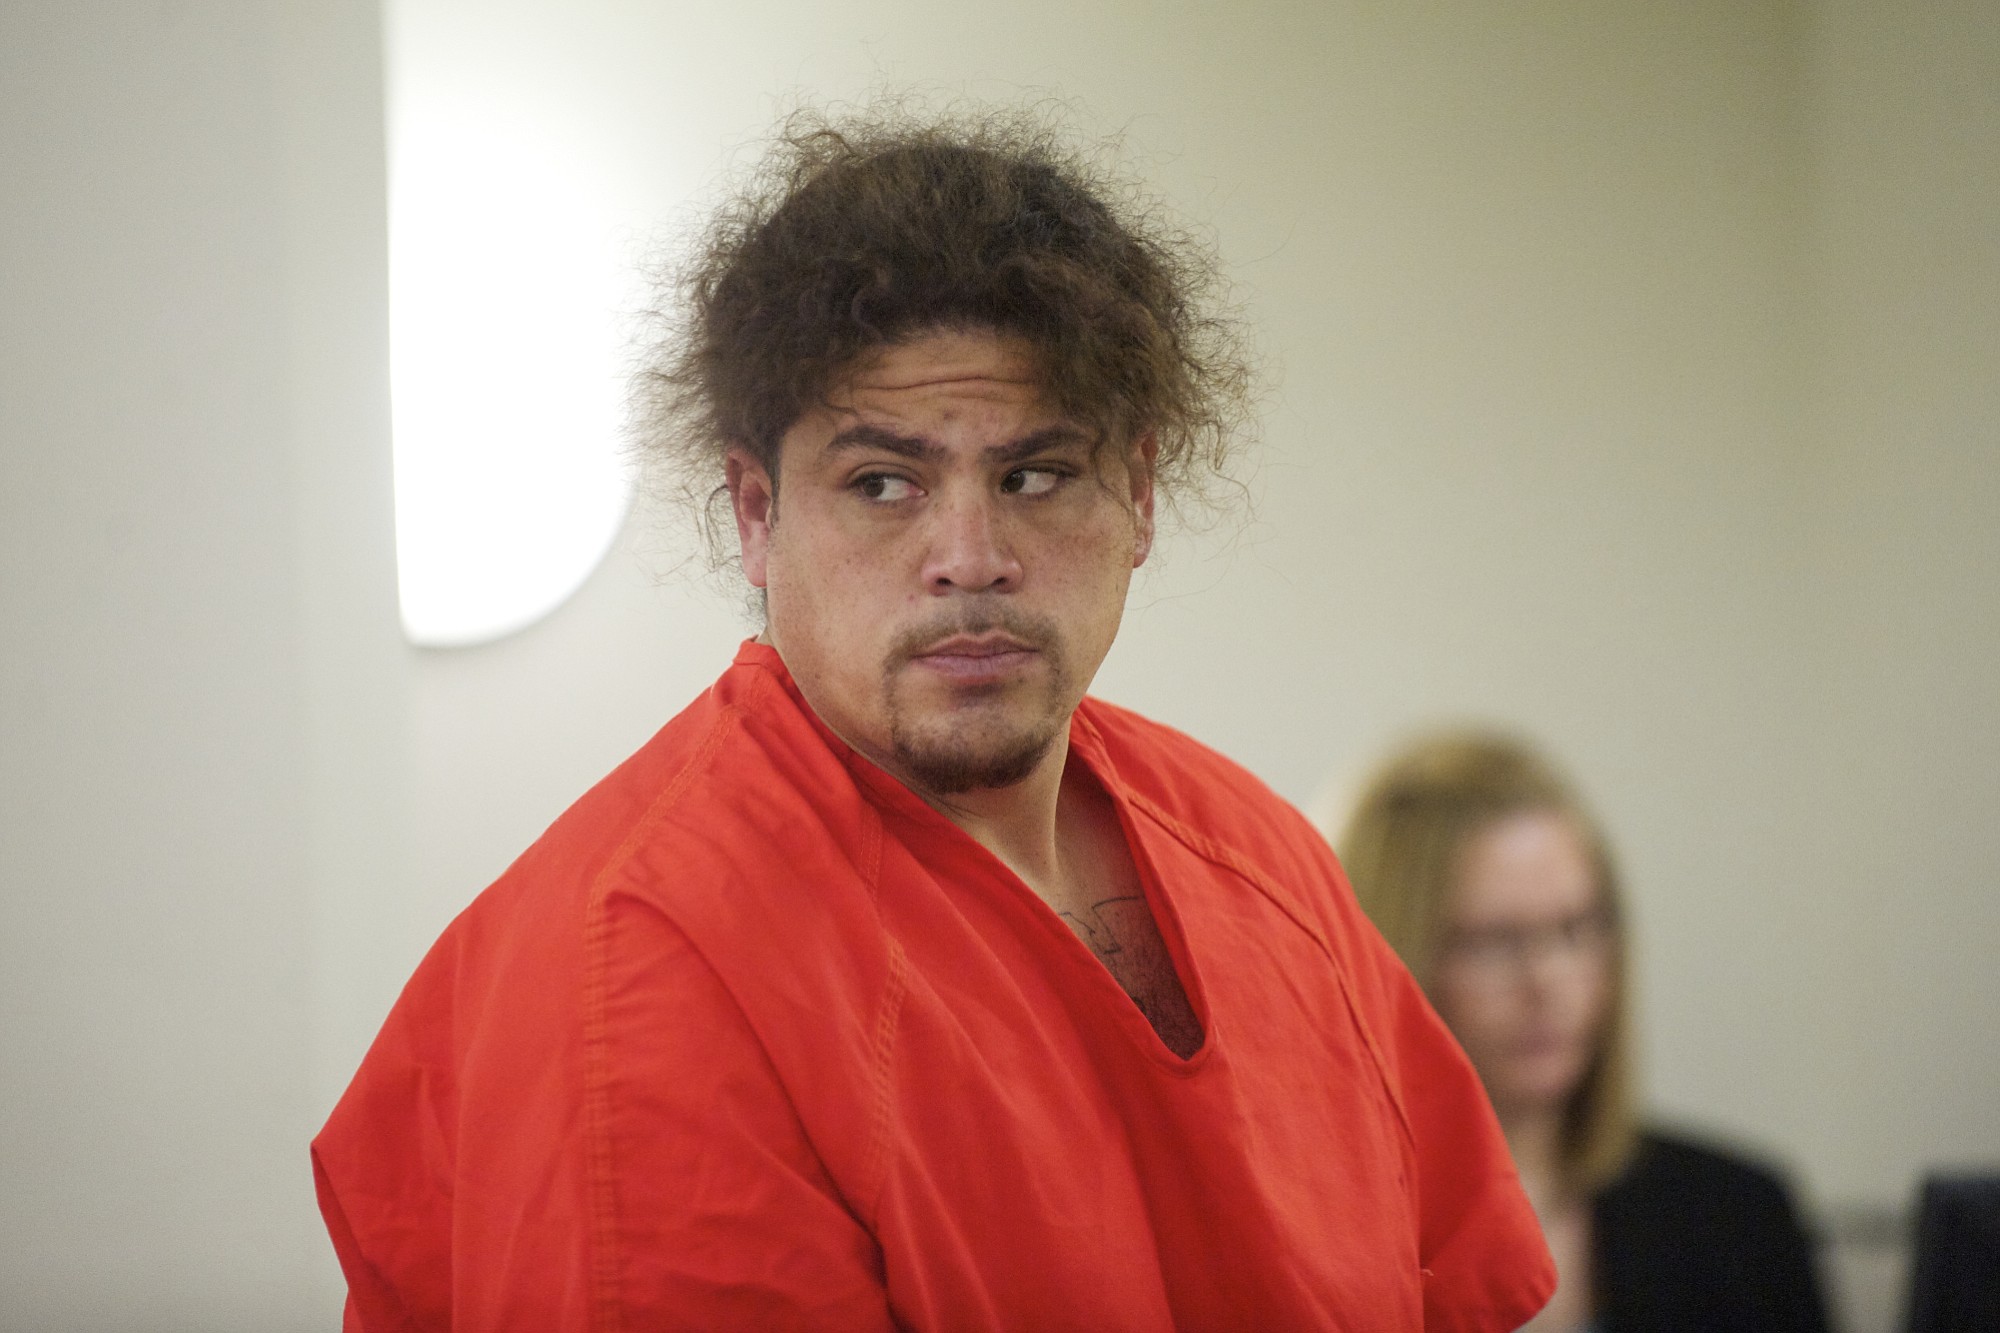 Angelino Pena of Vancouver is on trial on a charge of second-degree attempted murder with a weapons enhancement in connection with a shooting in 2013 at downtown Vancouver's EconoLodge.